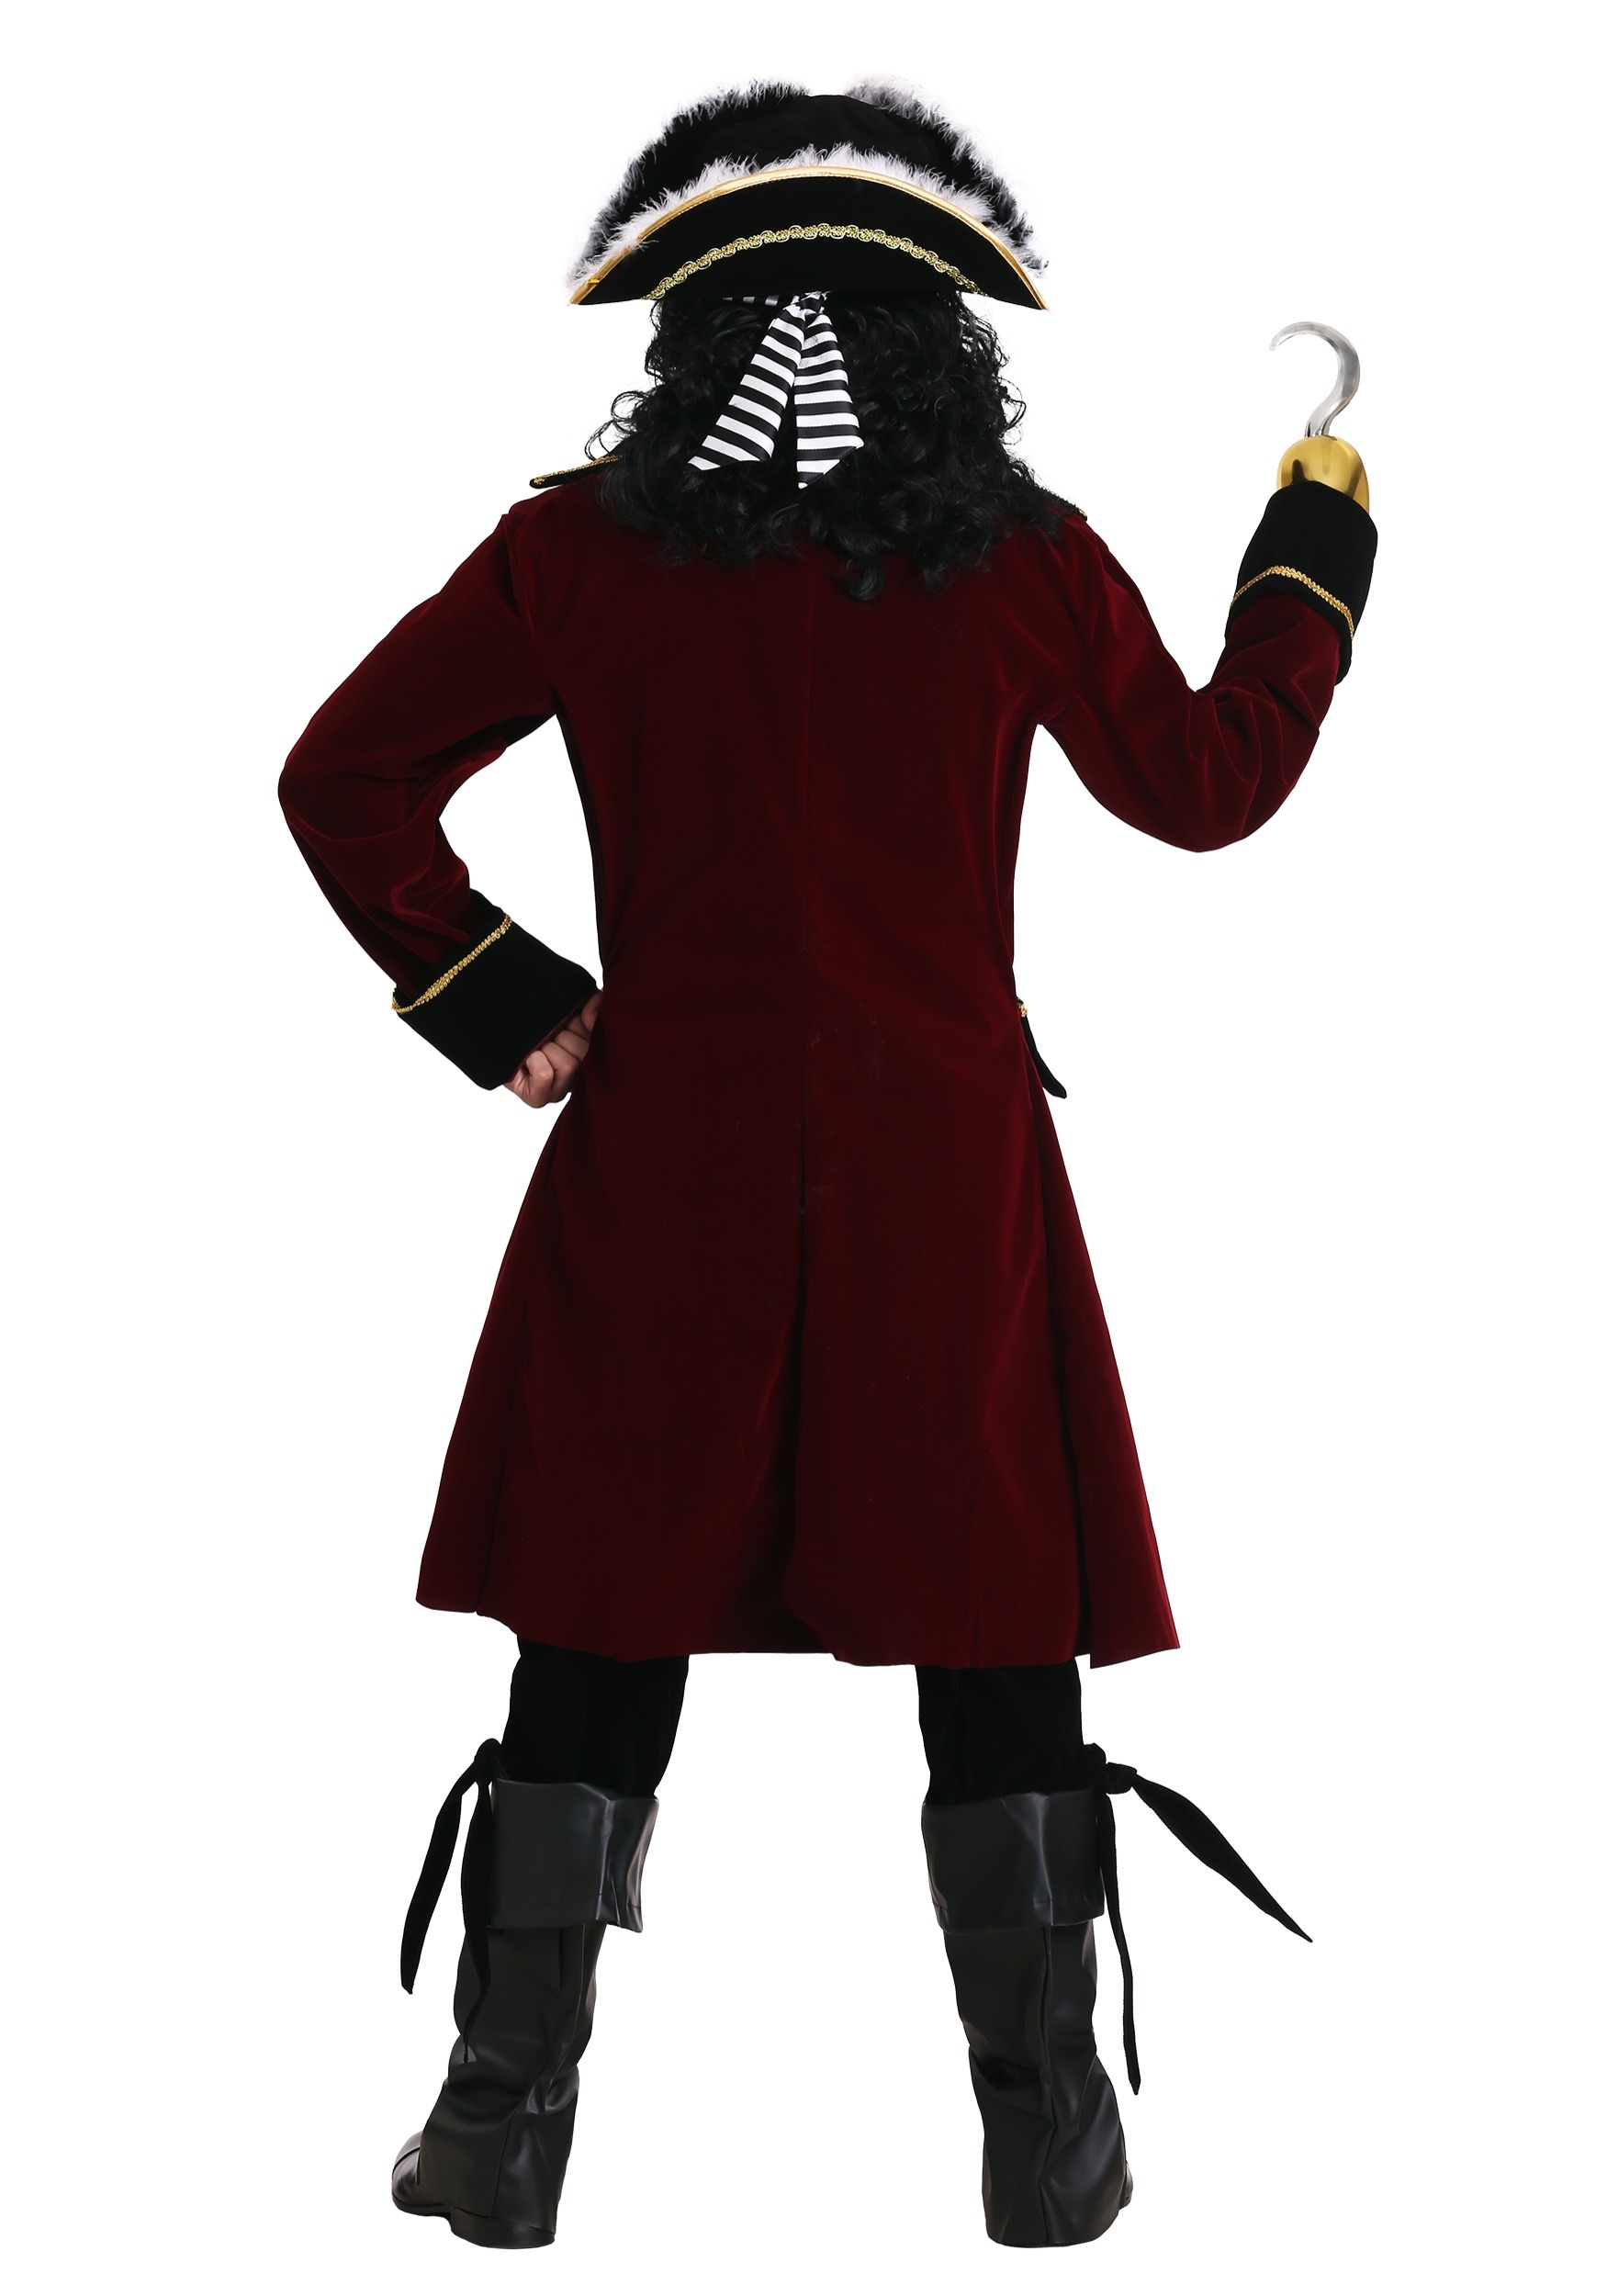 https://images.fun.com.au/products/5233/2-1-100508/deluxe-captain-hook-plus-size-costume-update1-back.jpg